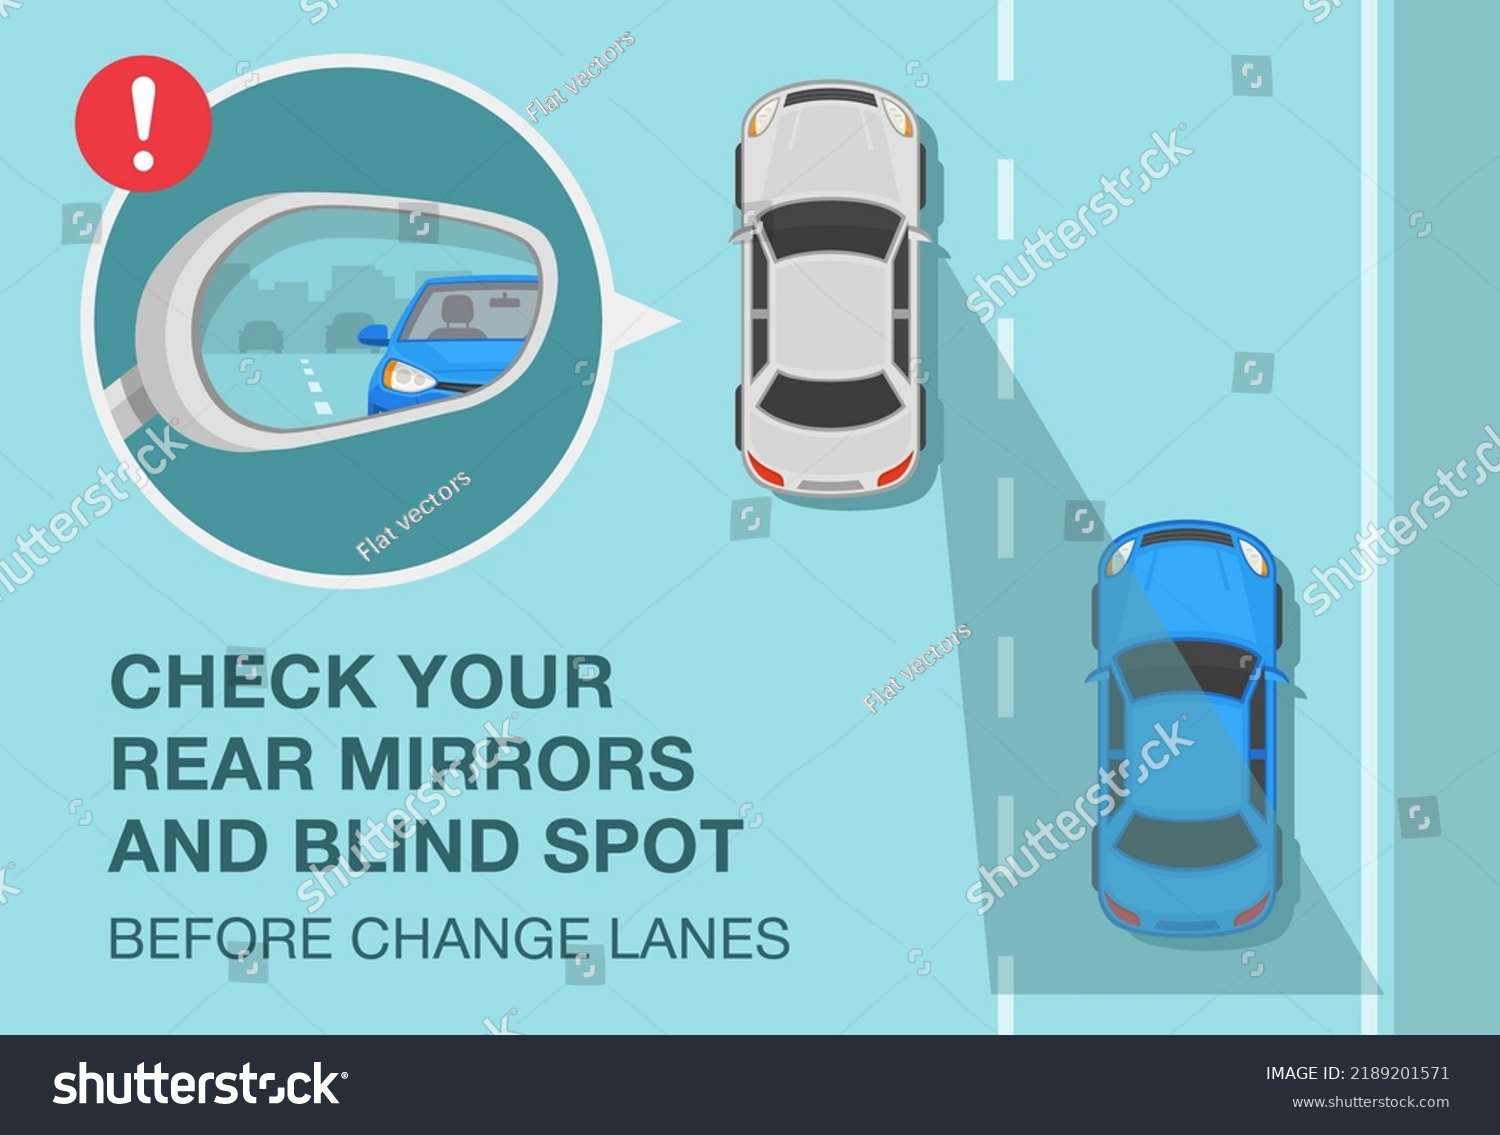 SVG of Safe driving rules and tips. Check your mirrors and blind spot before change lanes. Close-up view of a vehicle wing mirror. Top view. Flat vector illustration template. svg